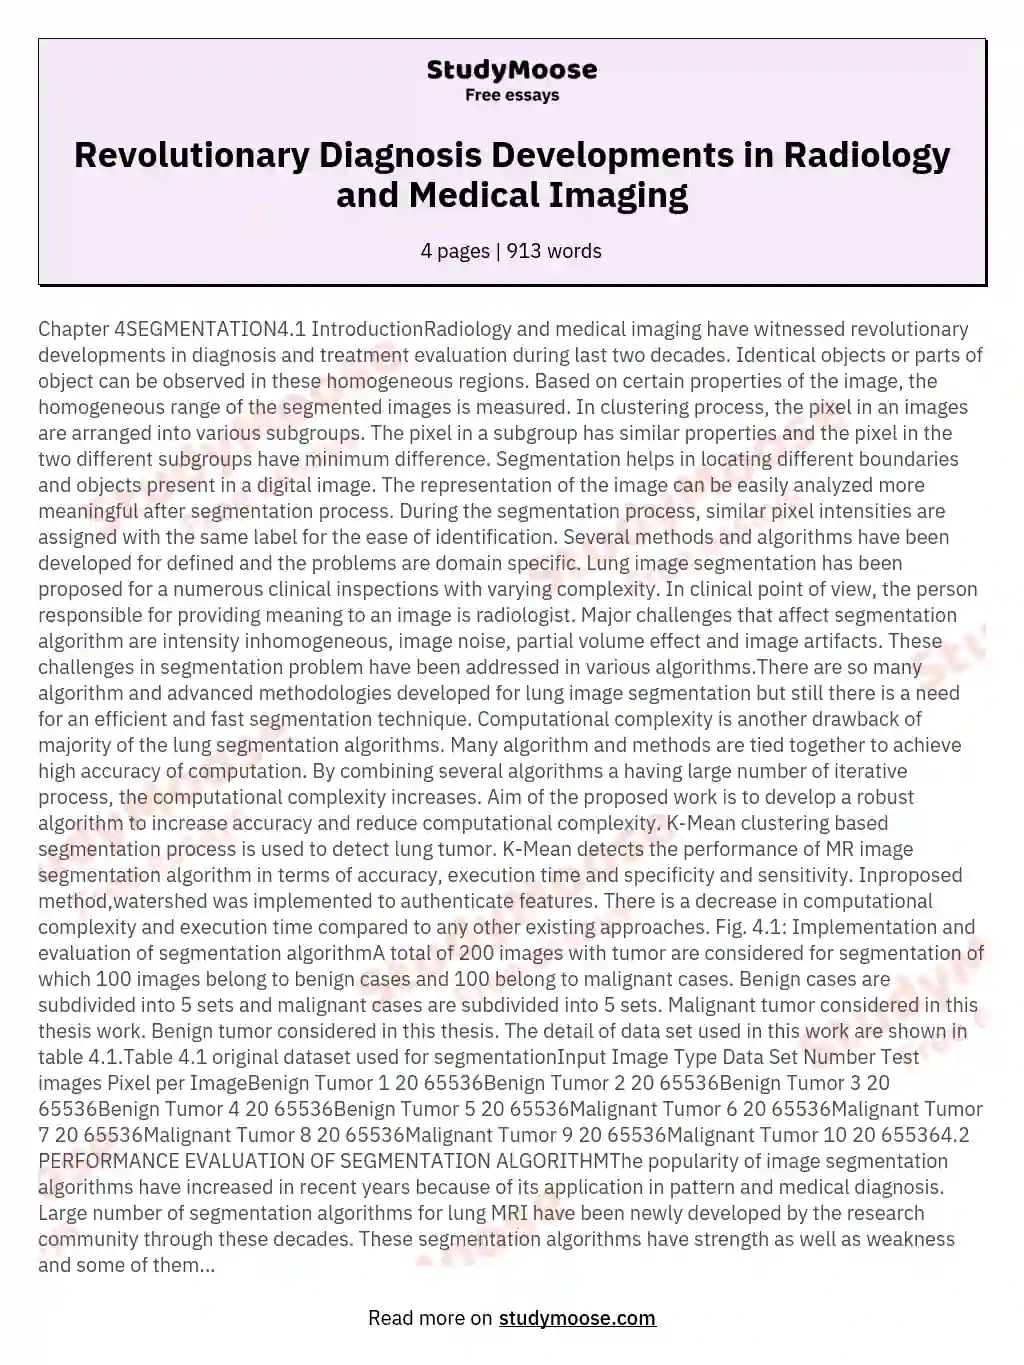 Revolutionary Diagnosis Developments in Radiology and Medical Imaging essay